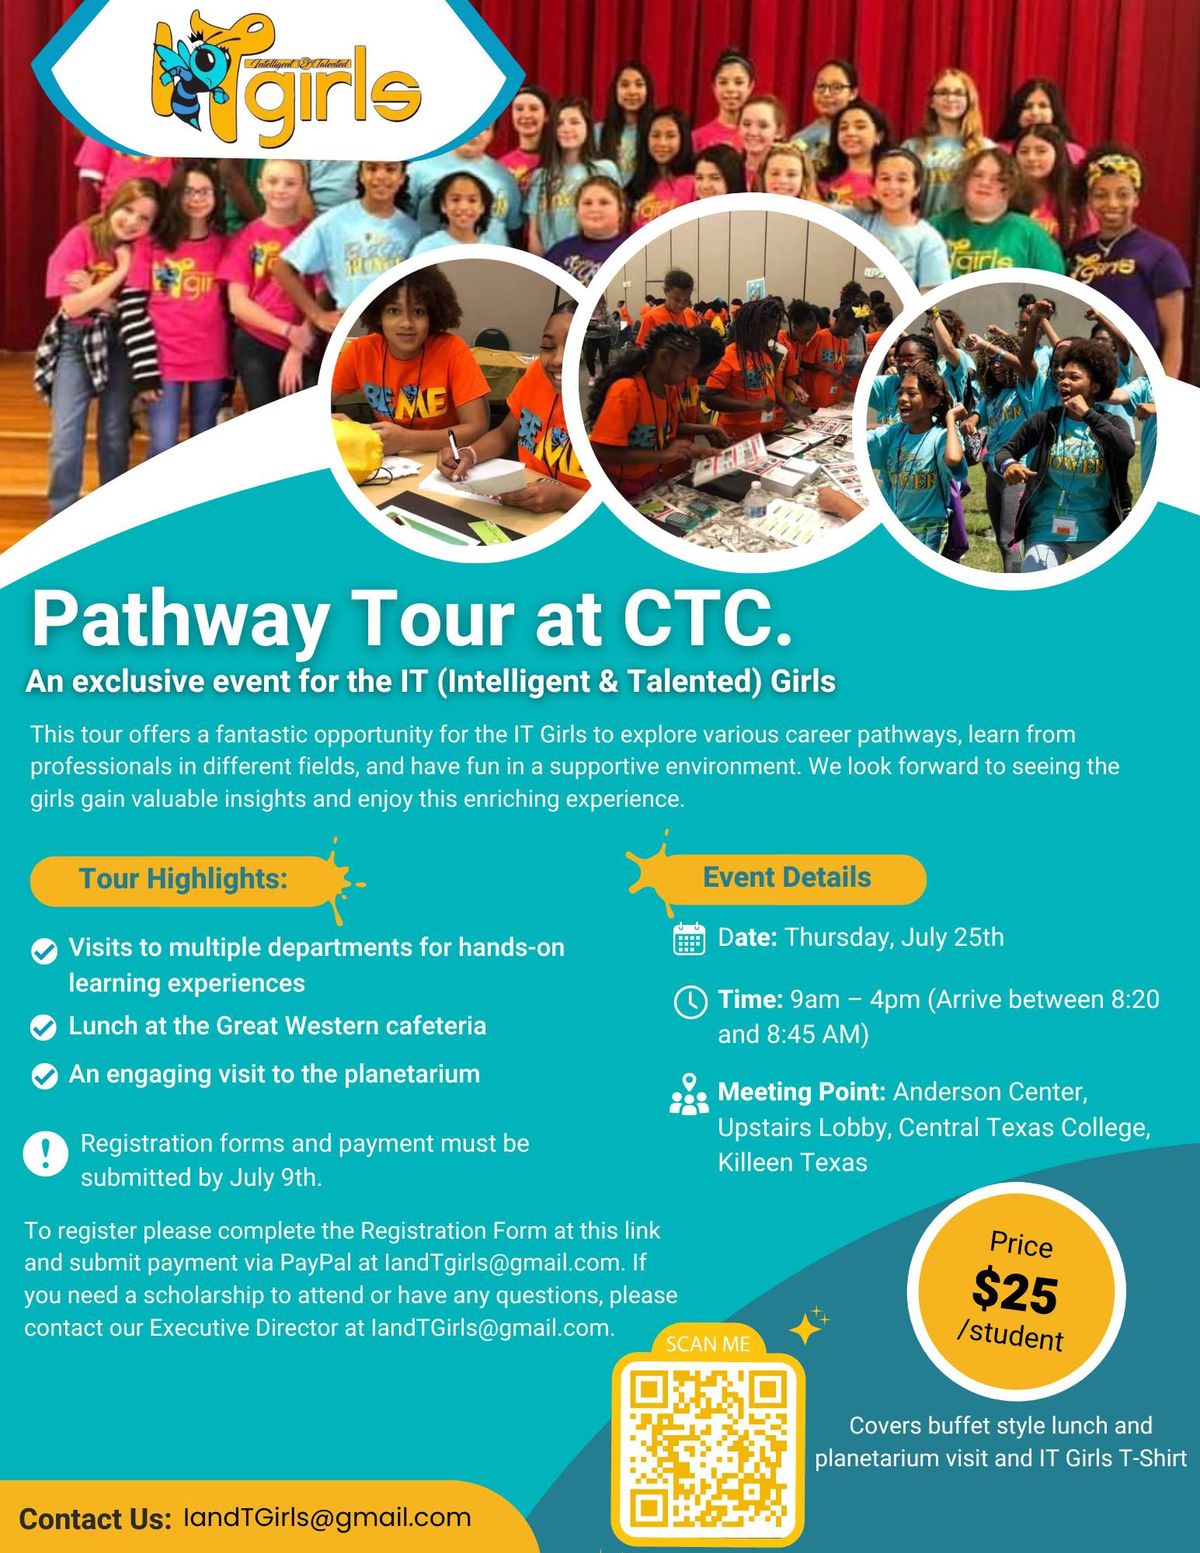 Career Pathway Tour for Intelligent & Talented Girls